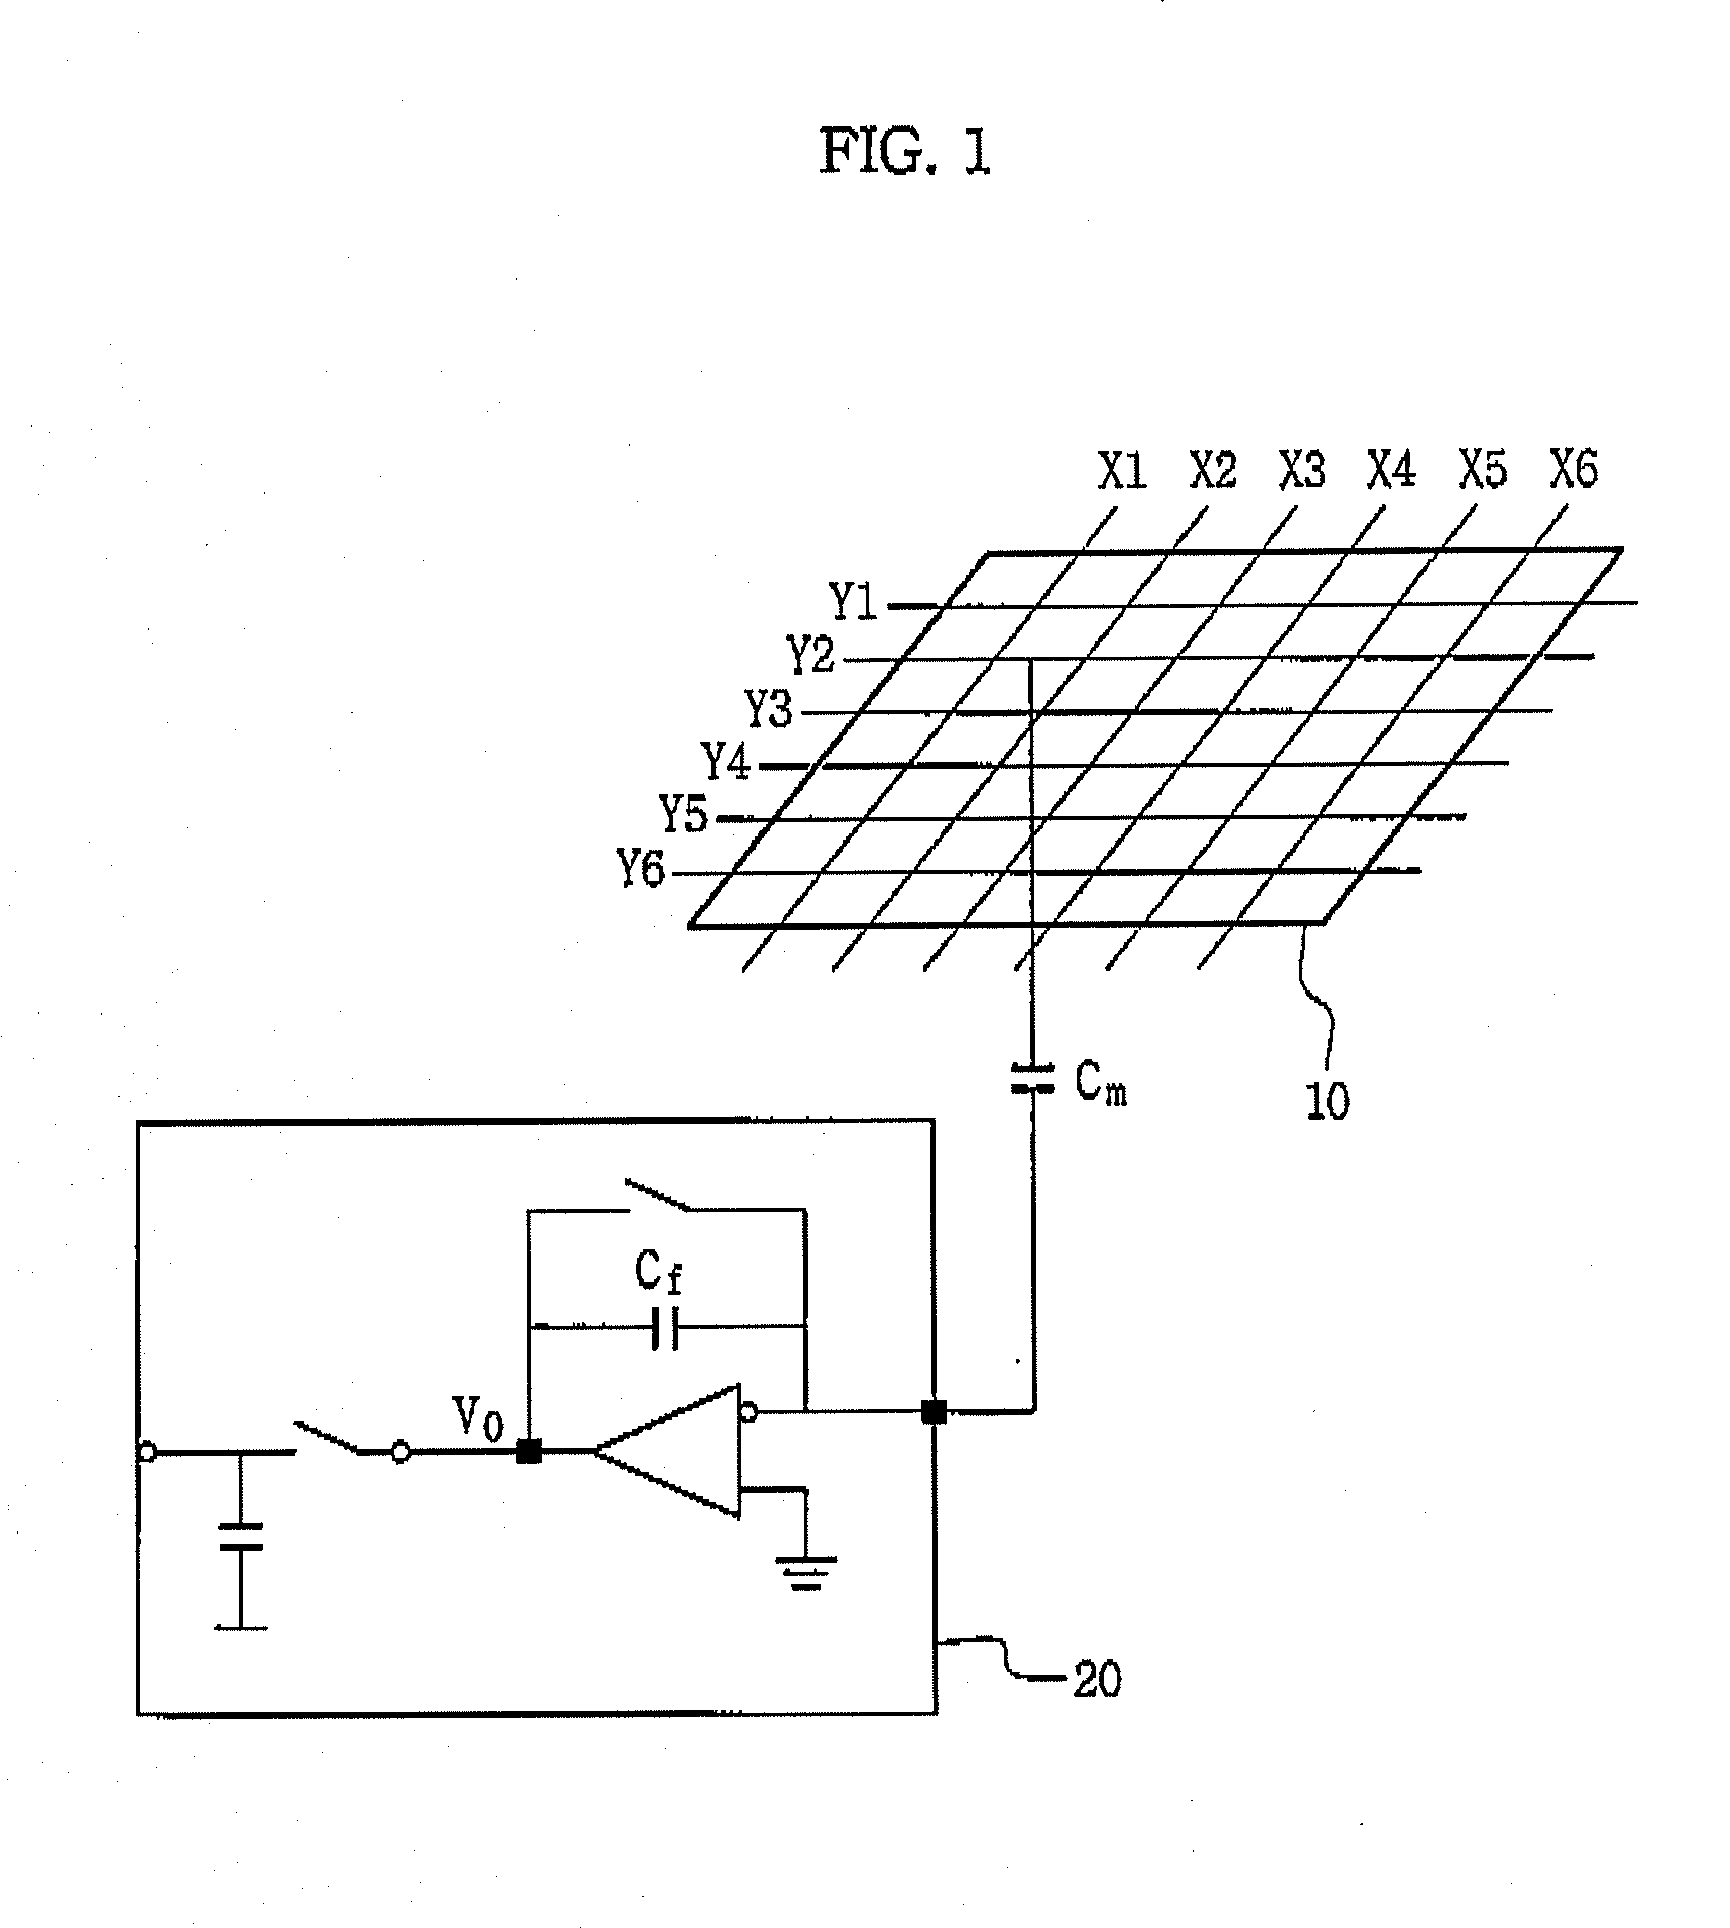 Apparatus for driving touch panel